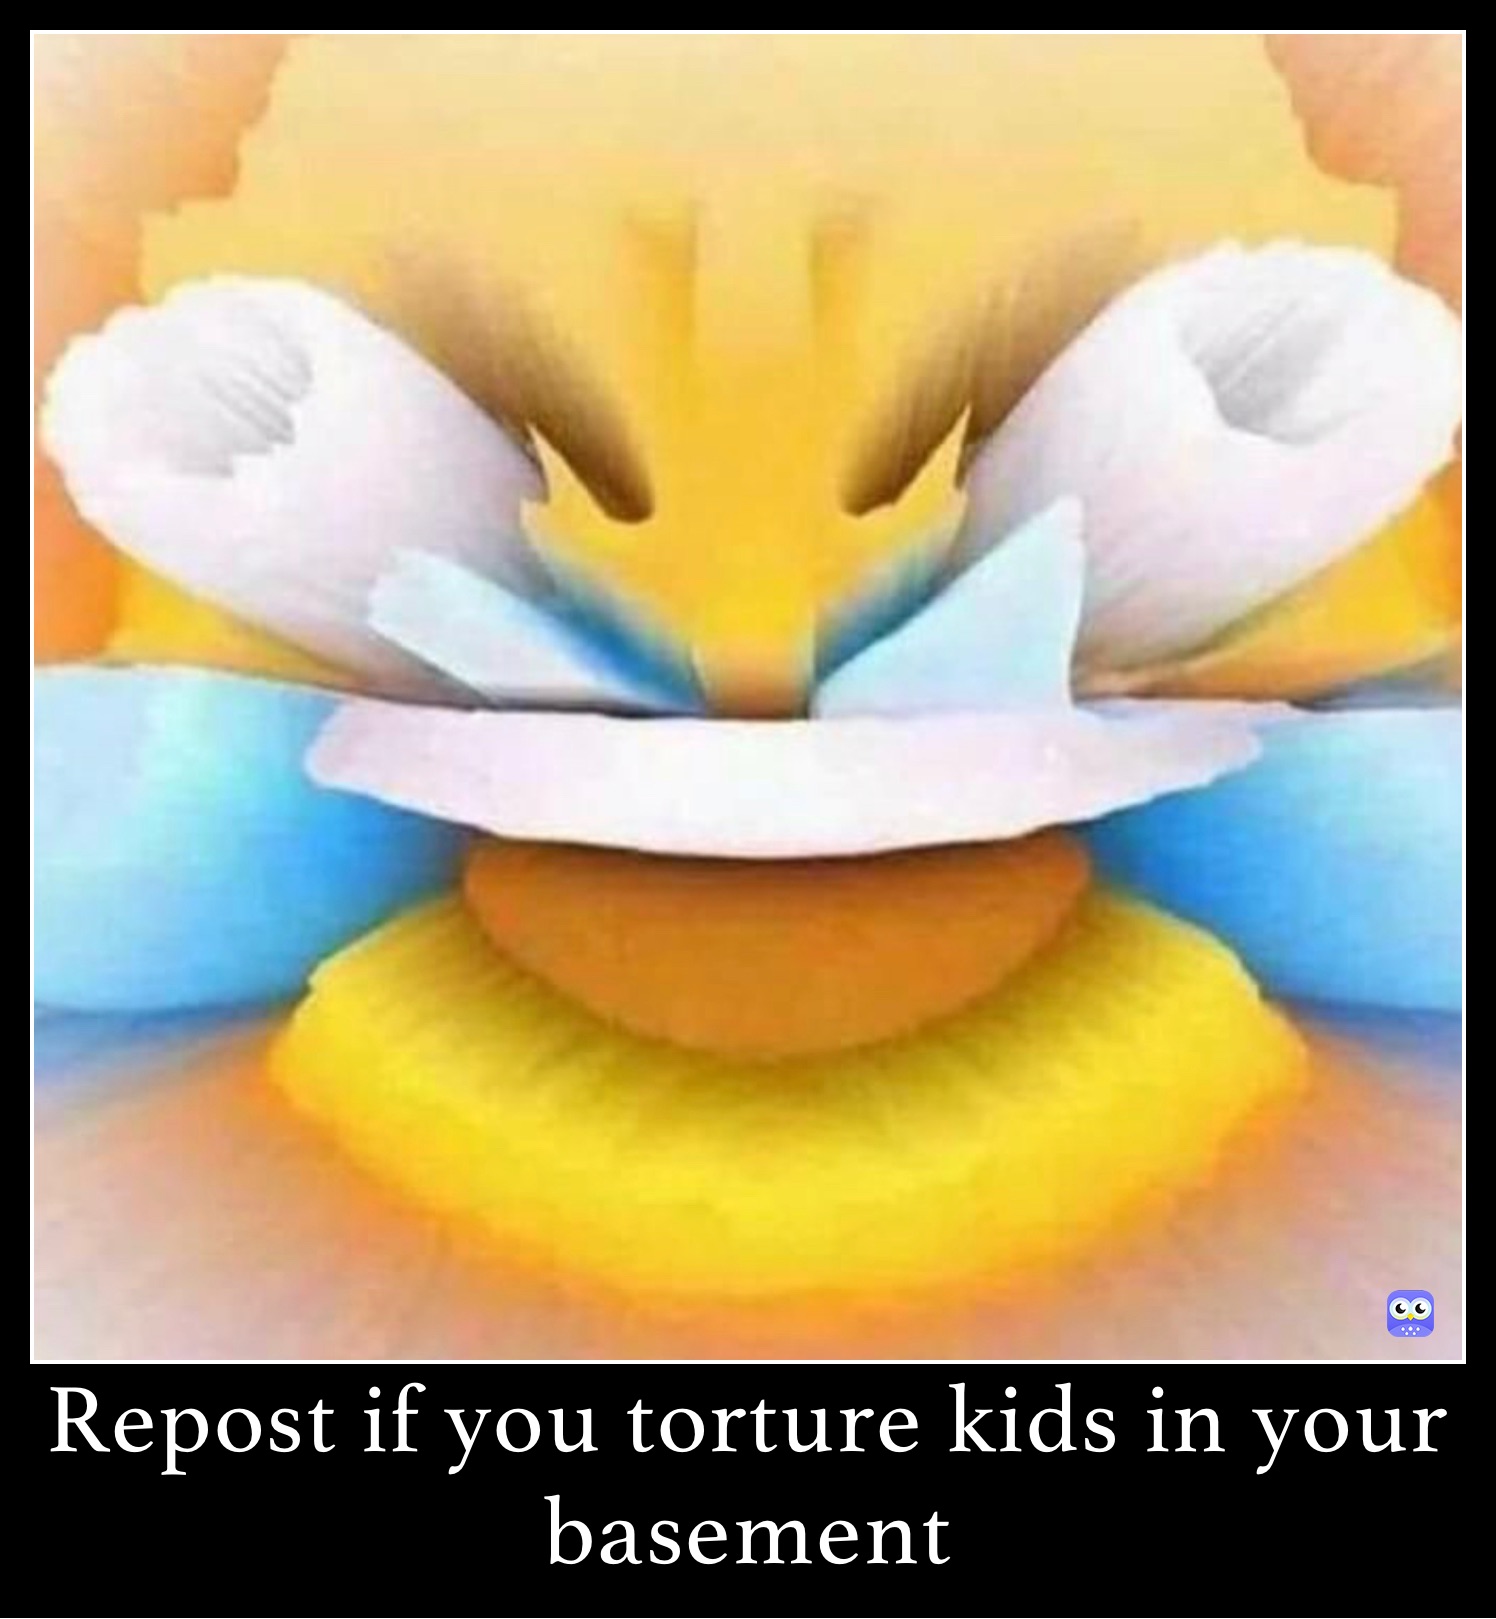 Repost if you torture kids in your basement